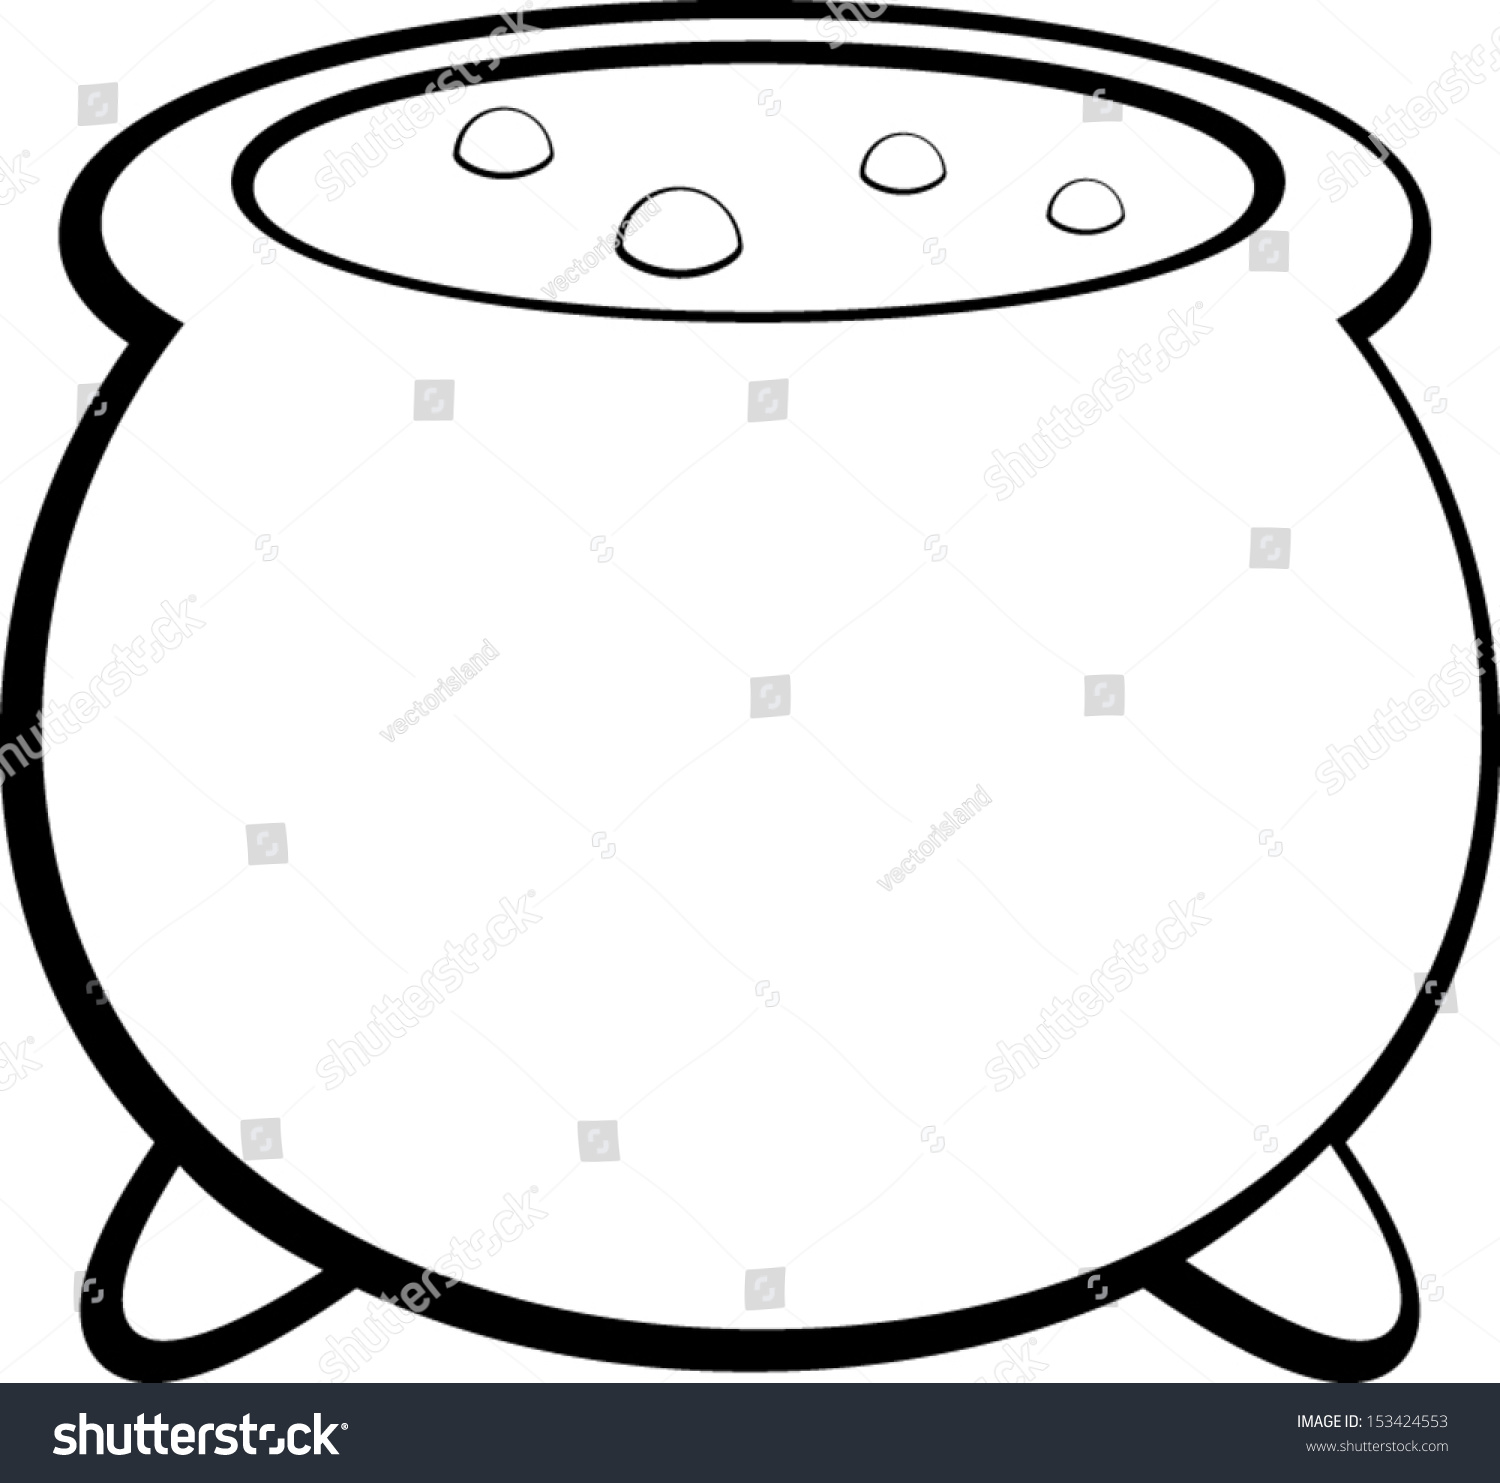 Witch Cauldron Stock Vector 153424553 Shutterstock